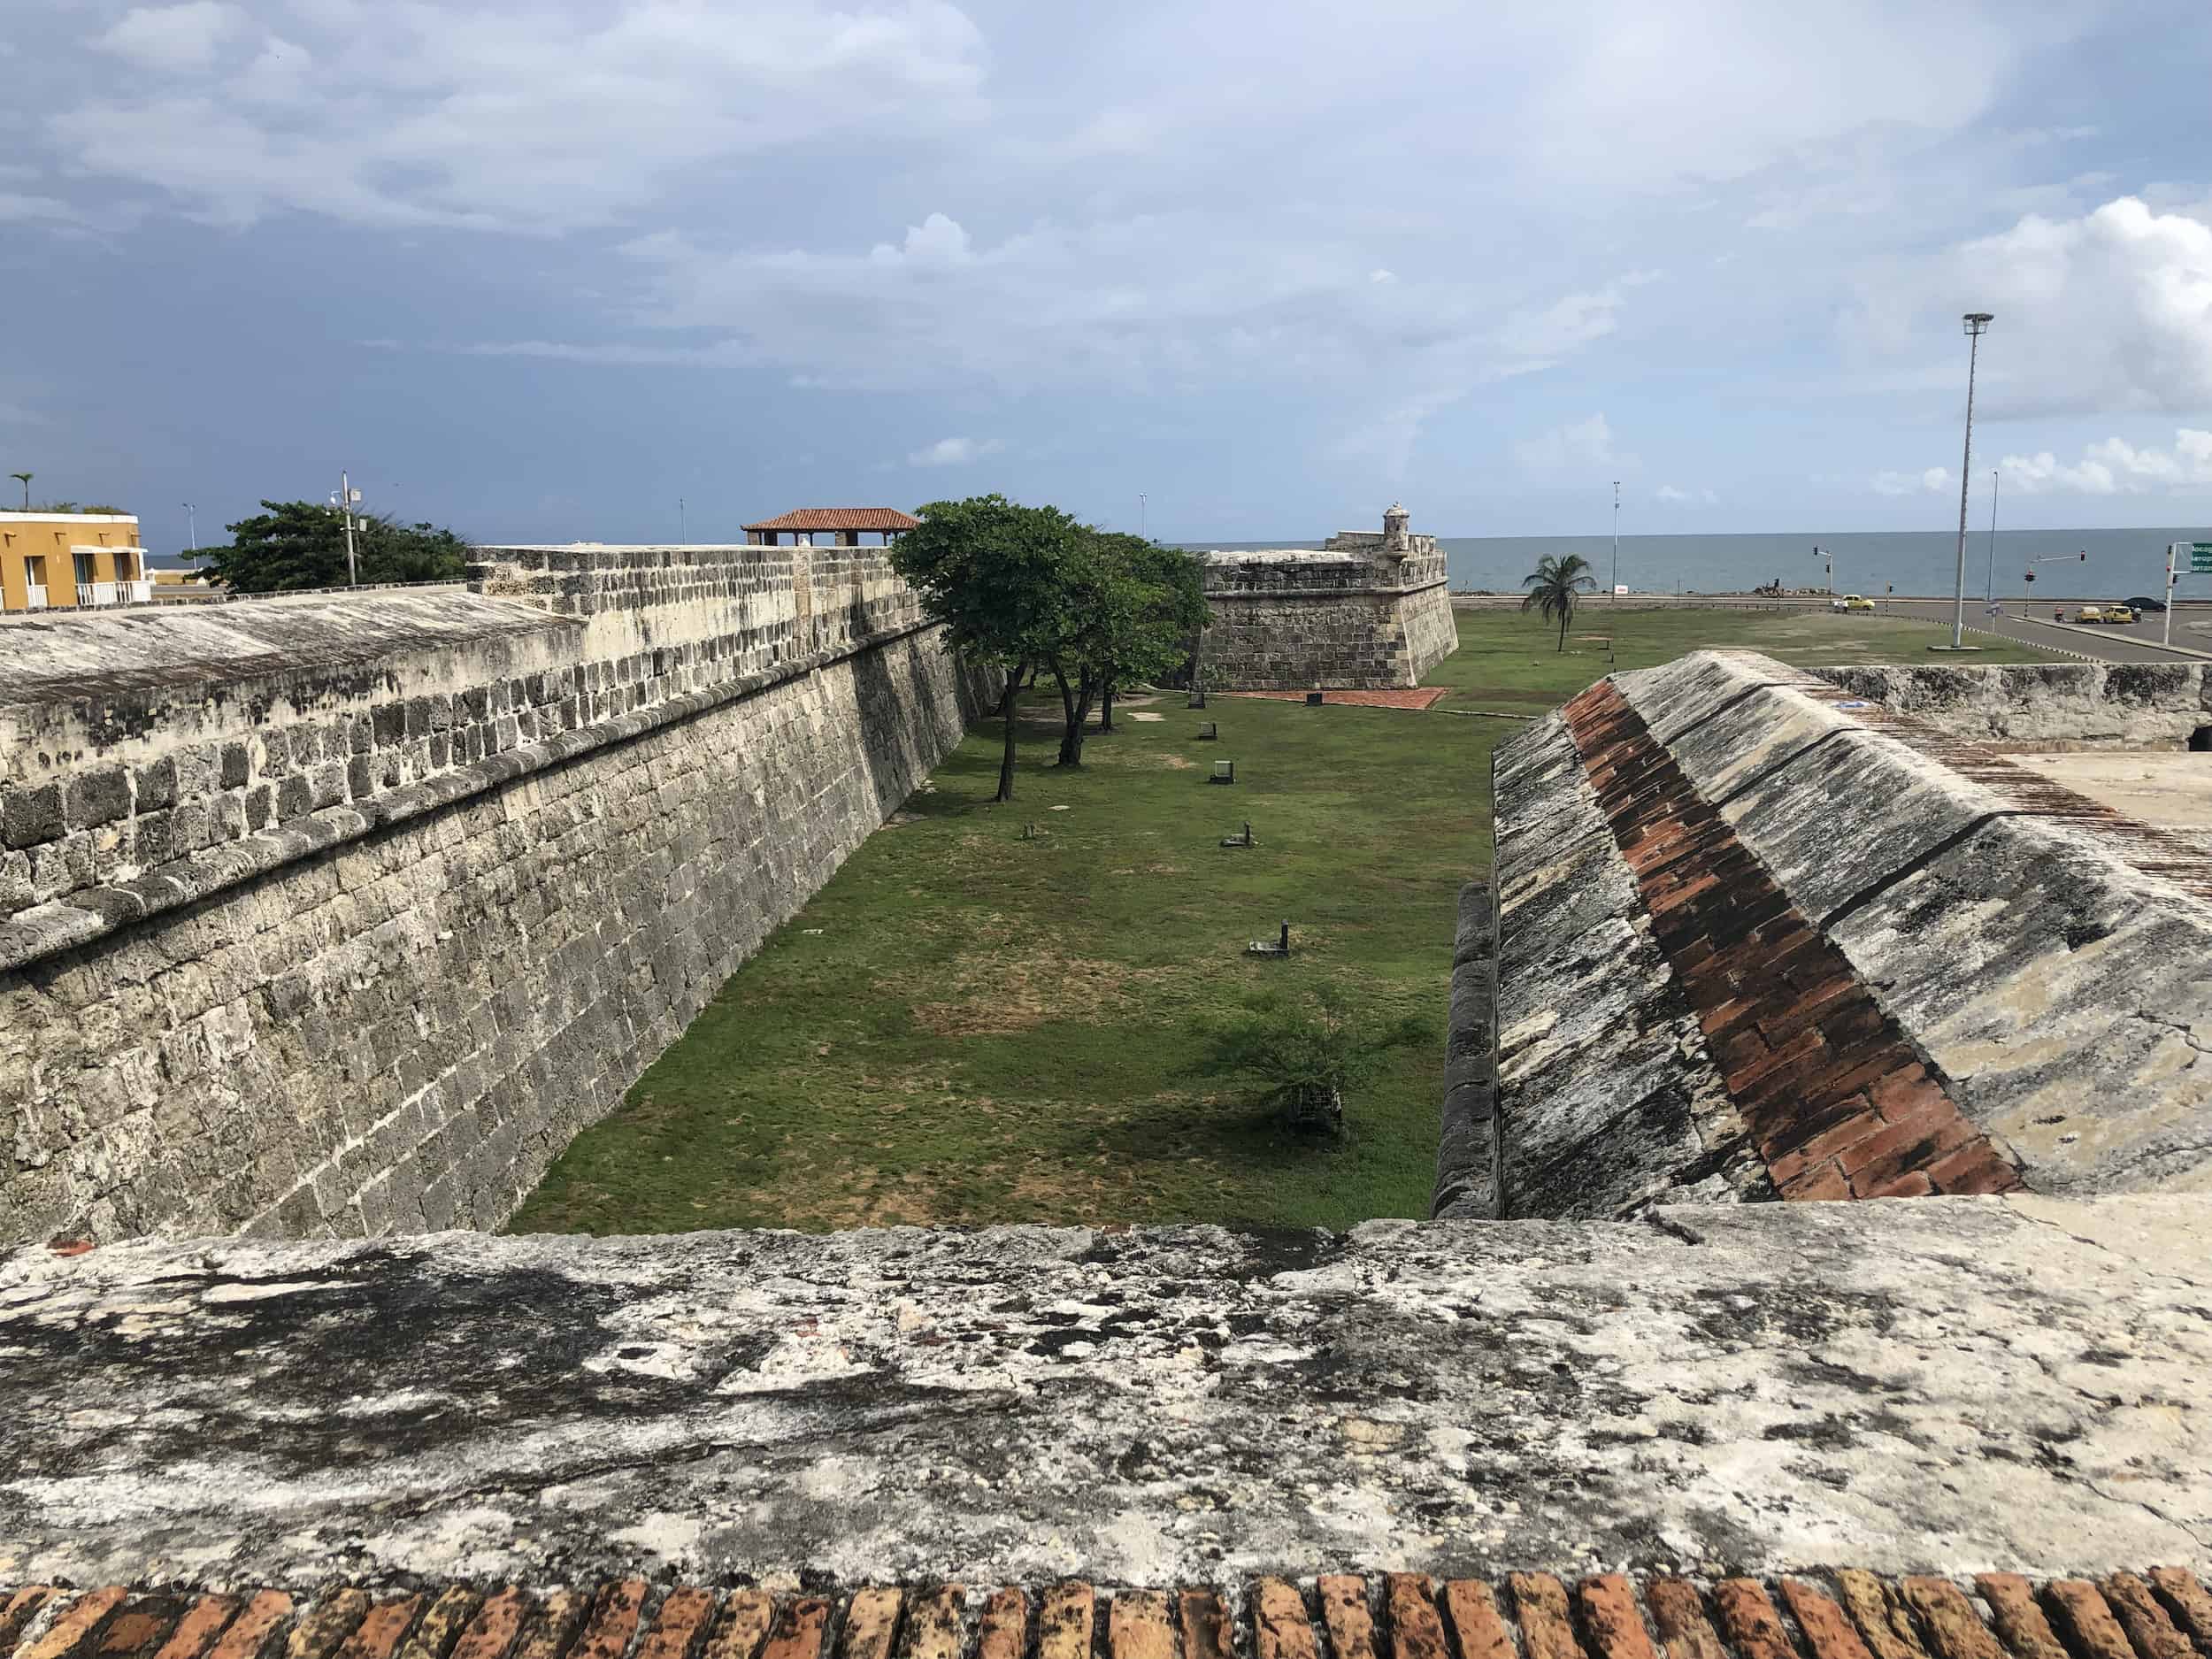 Looking towards the Bastion of Saint Catherine from the Bastion of Saint Luke on the Walls of Cartagena, Colombia